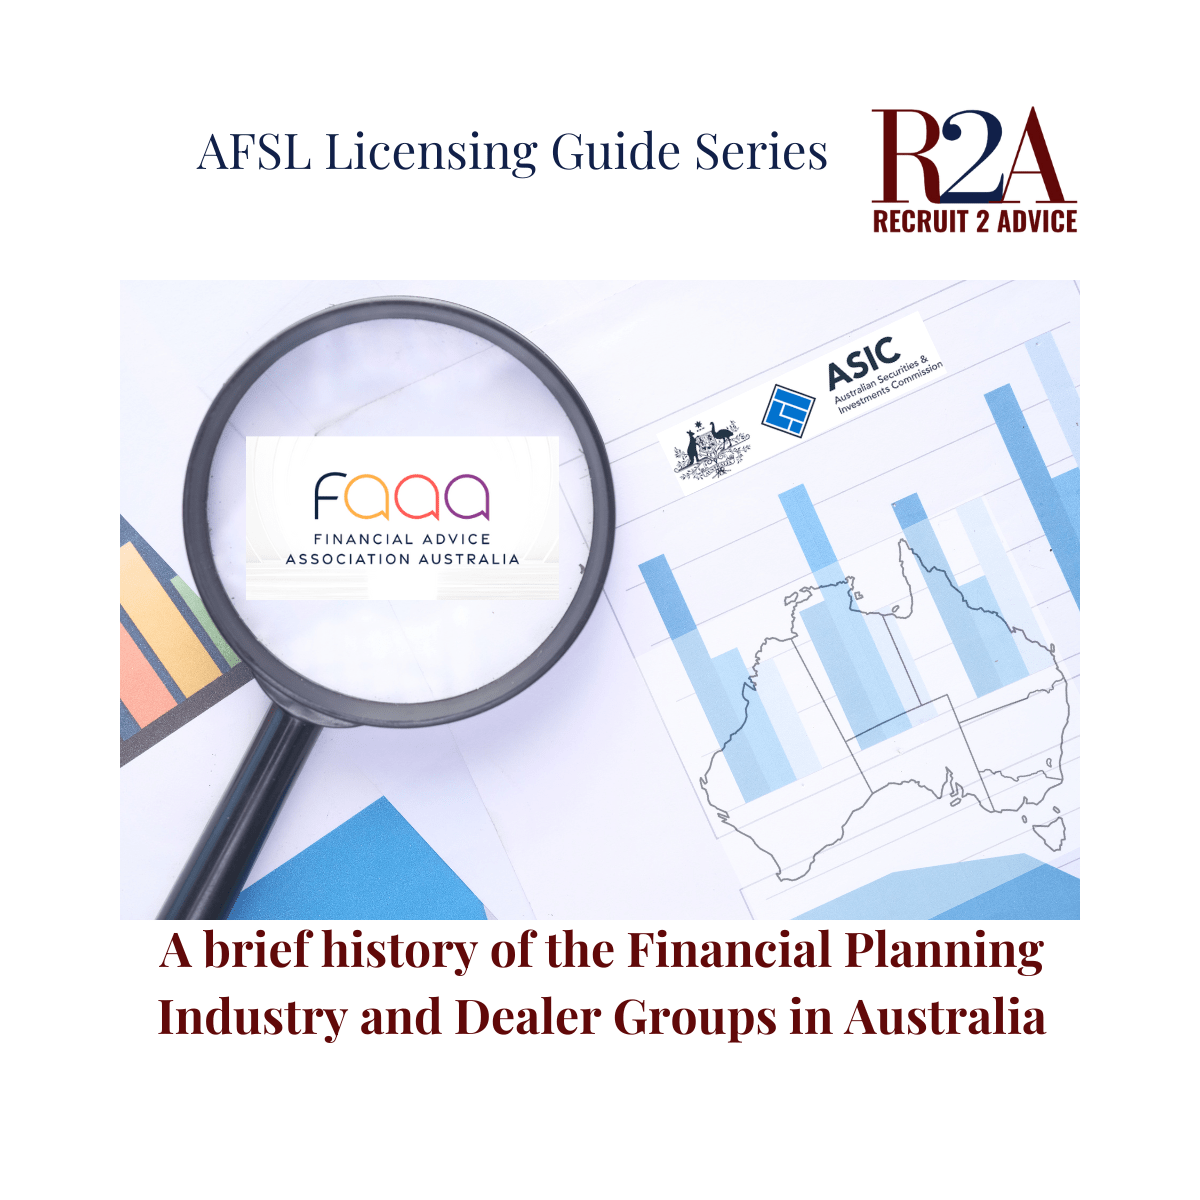 Recruit 2 Advice - Financial Planning Recruitment - AFSL Licensing Guide History